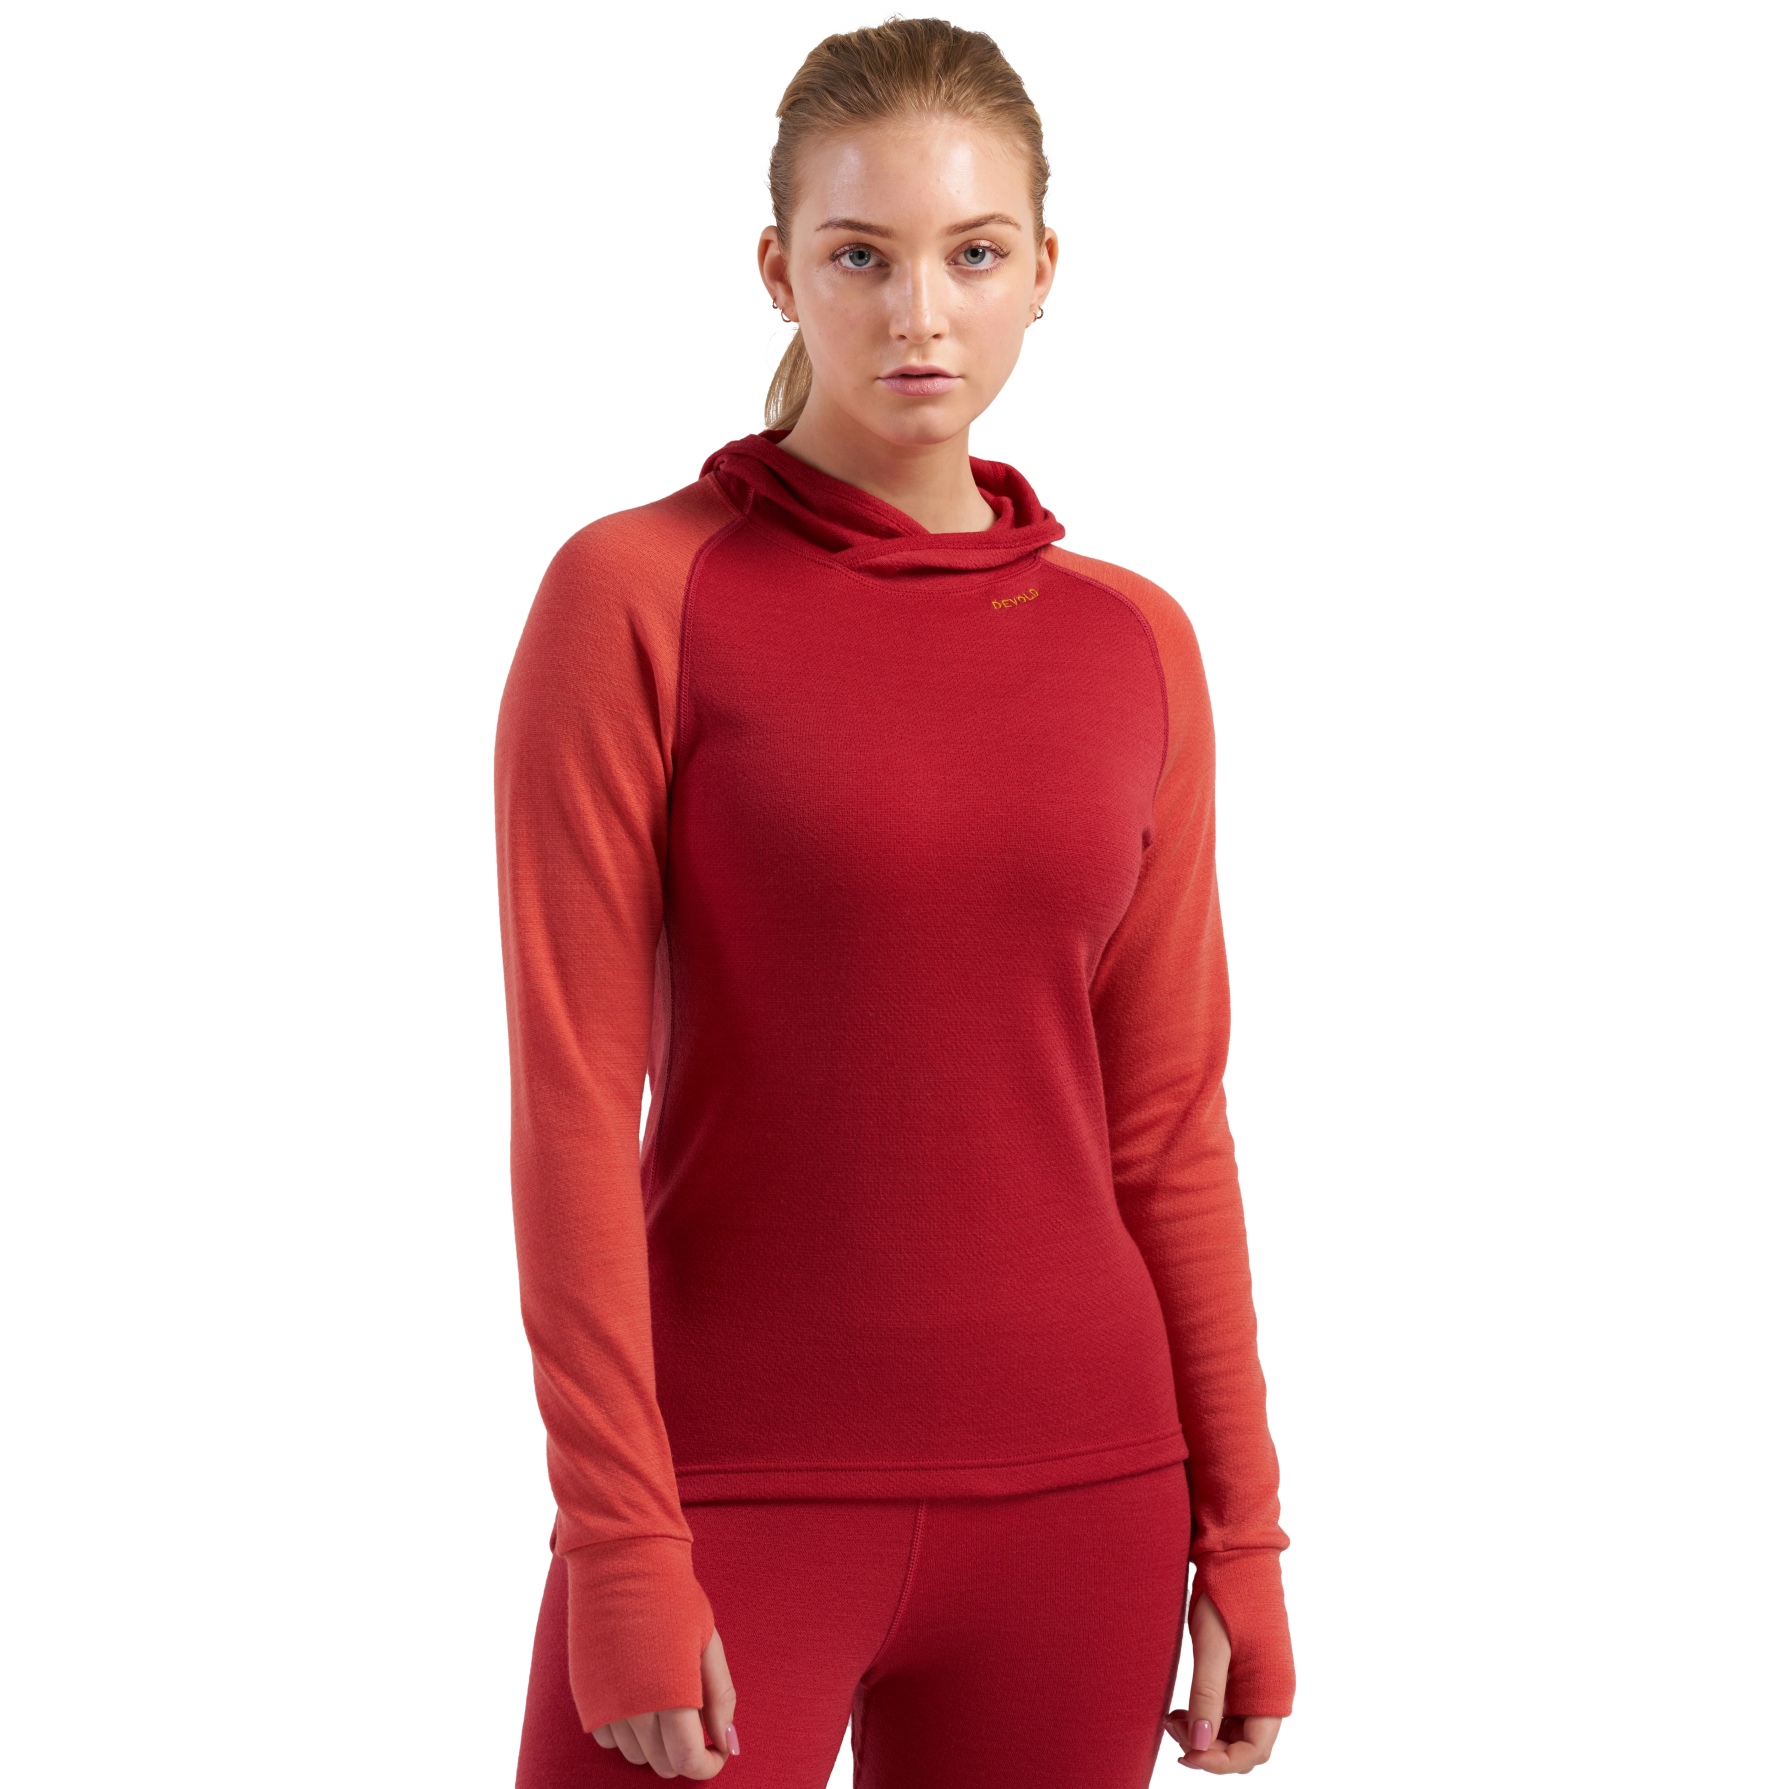 Picture of Devold Expedition Merino 235 Hoodie Women - 164 Beauty/Coral